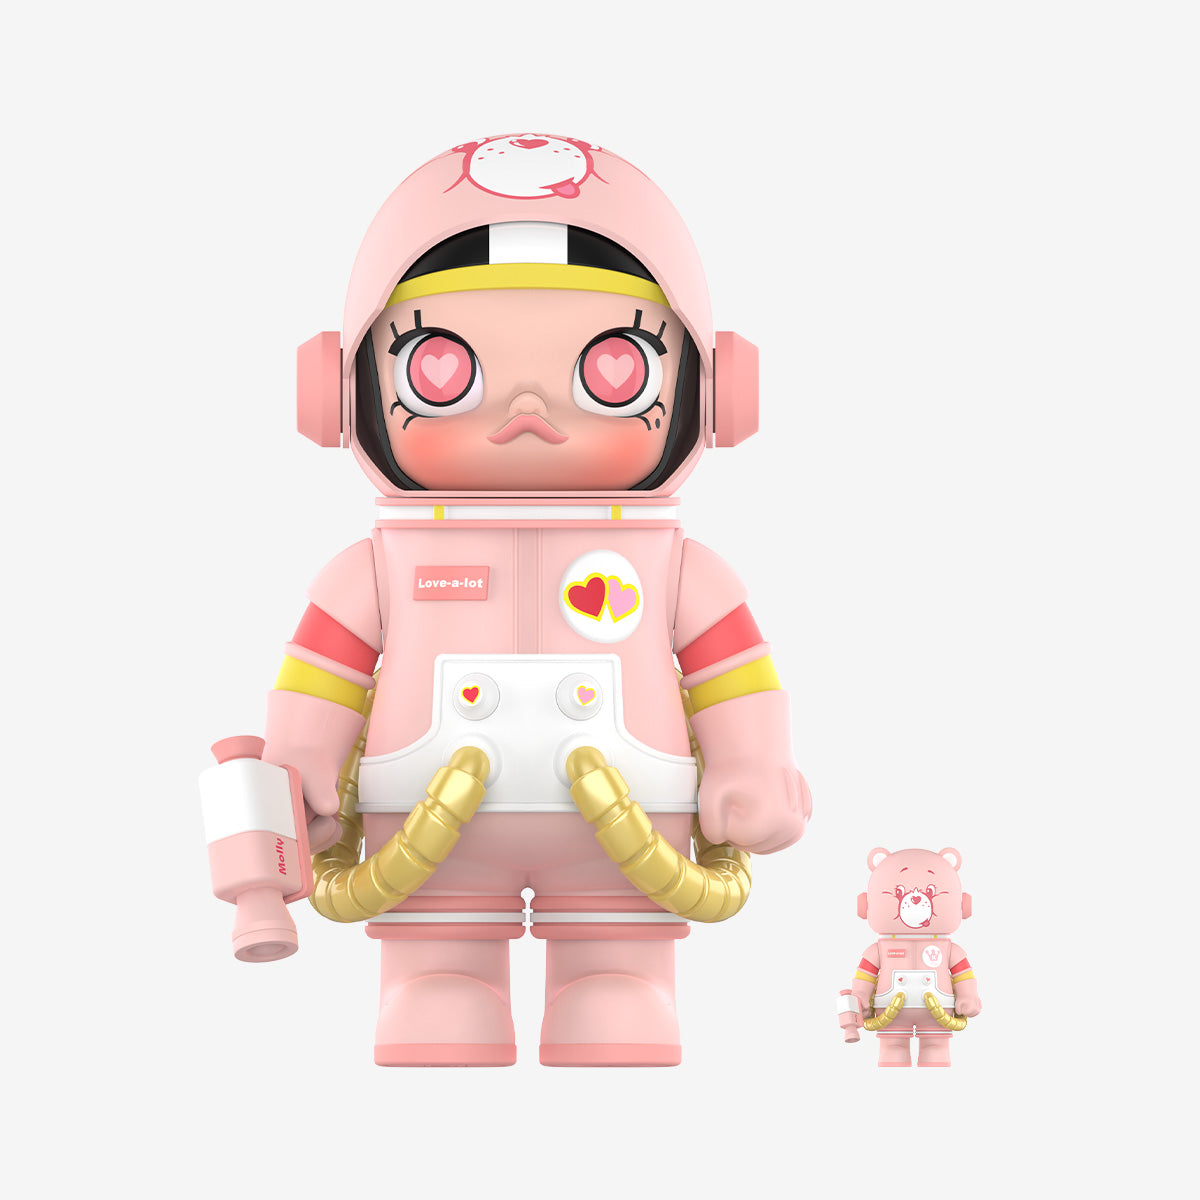 【Limited】Pop Mart: MEGA COLLECTION 400% + 100% SPACE MOLLY × Love-a-lot Bear